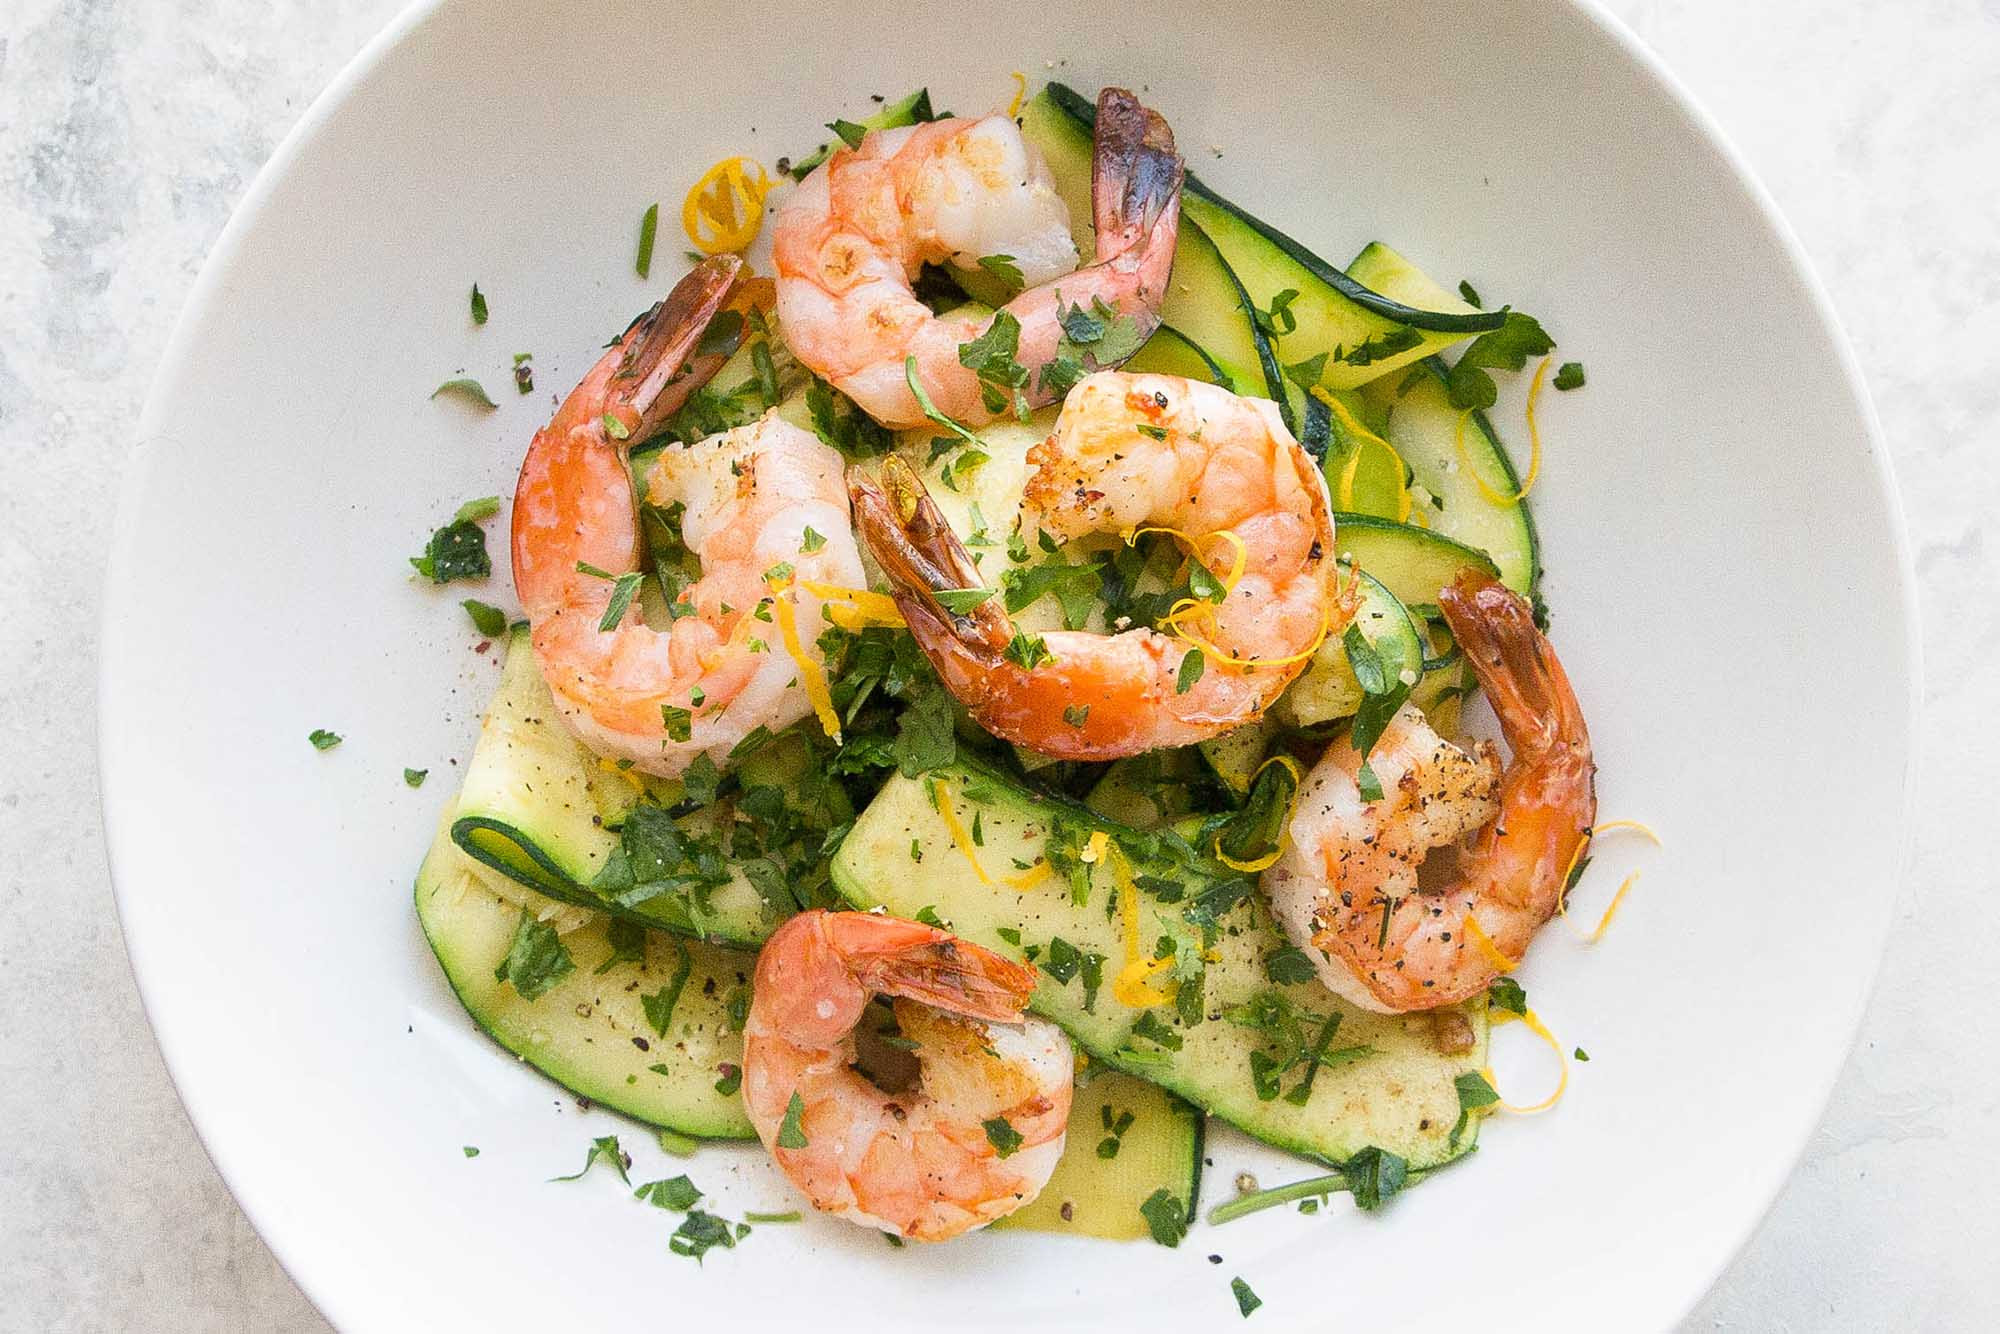 Shrimp And Fish Recipes
 Shrimp with Zucchini Noodles and Lemon Garlic Butter